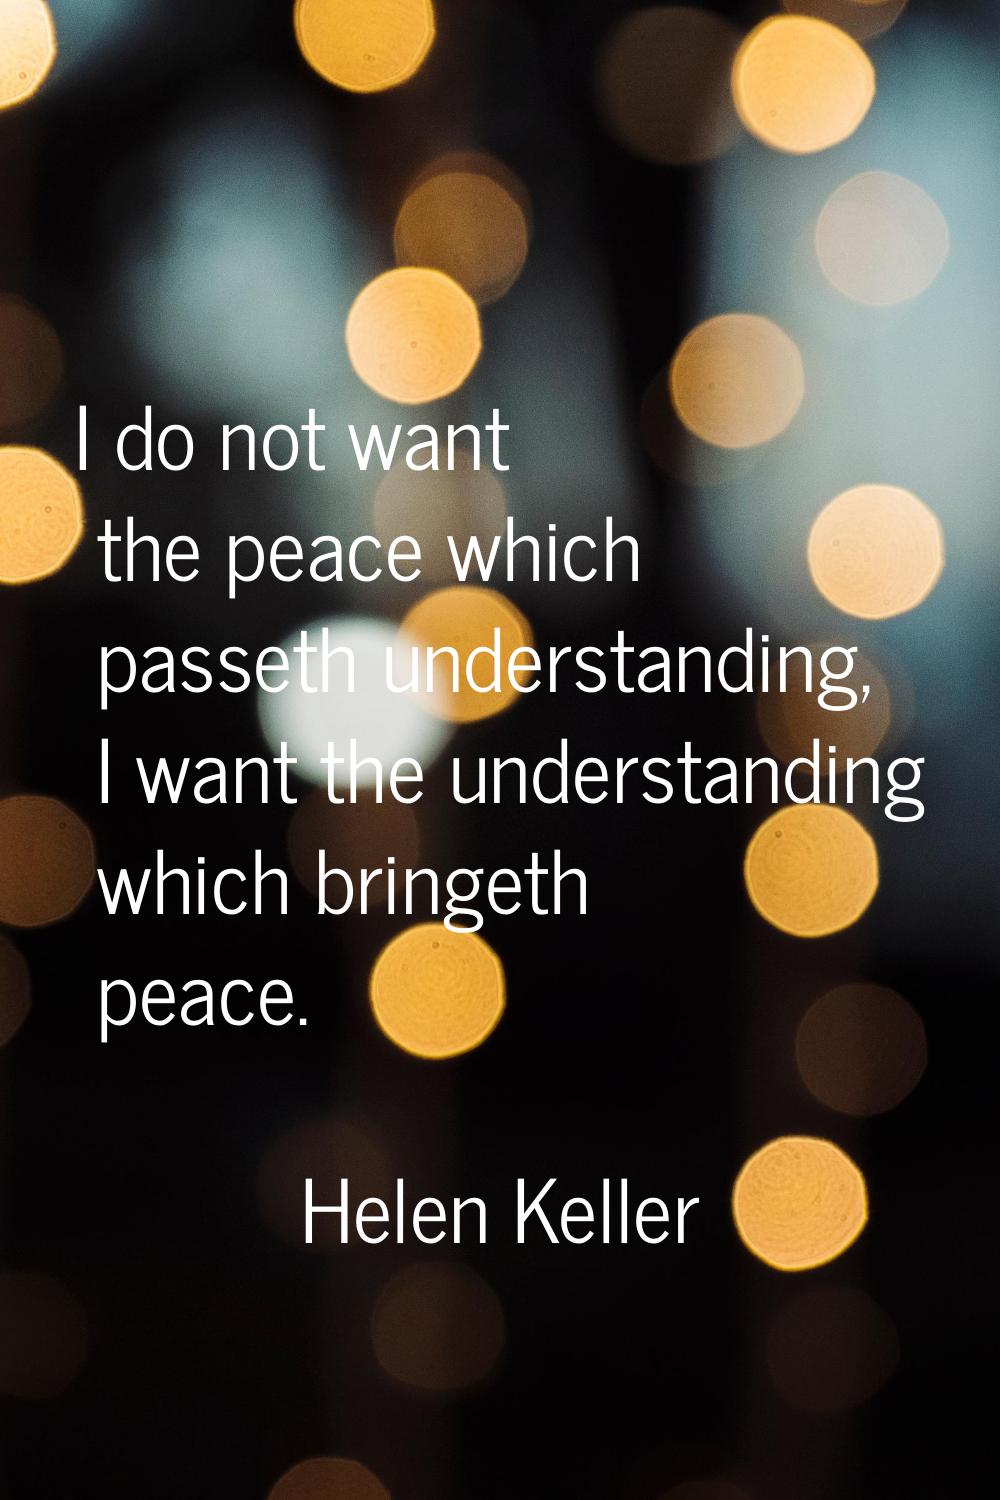 I do not want the peace which passeth understanding, I want the understanding which bringeth peace.